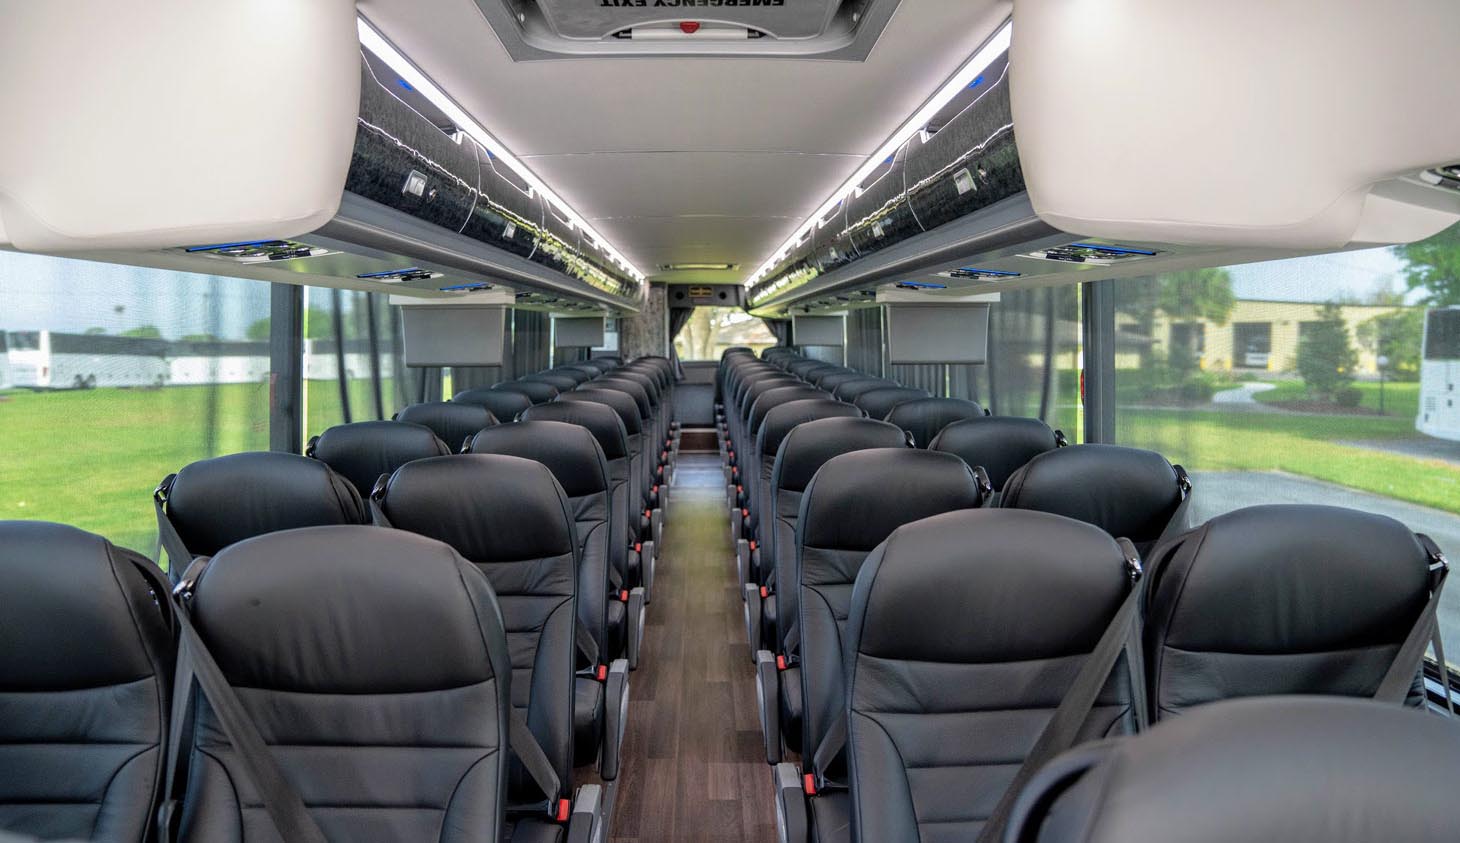 Charleston charter bus rentals with lethar seating